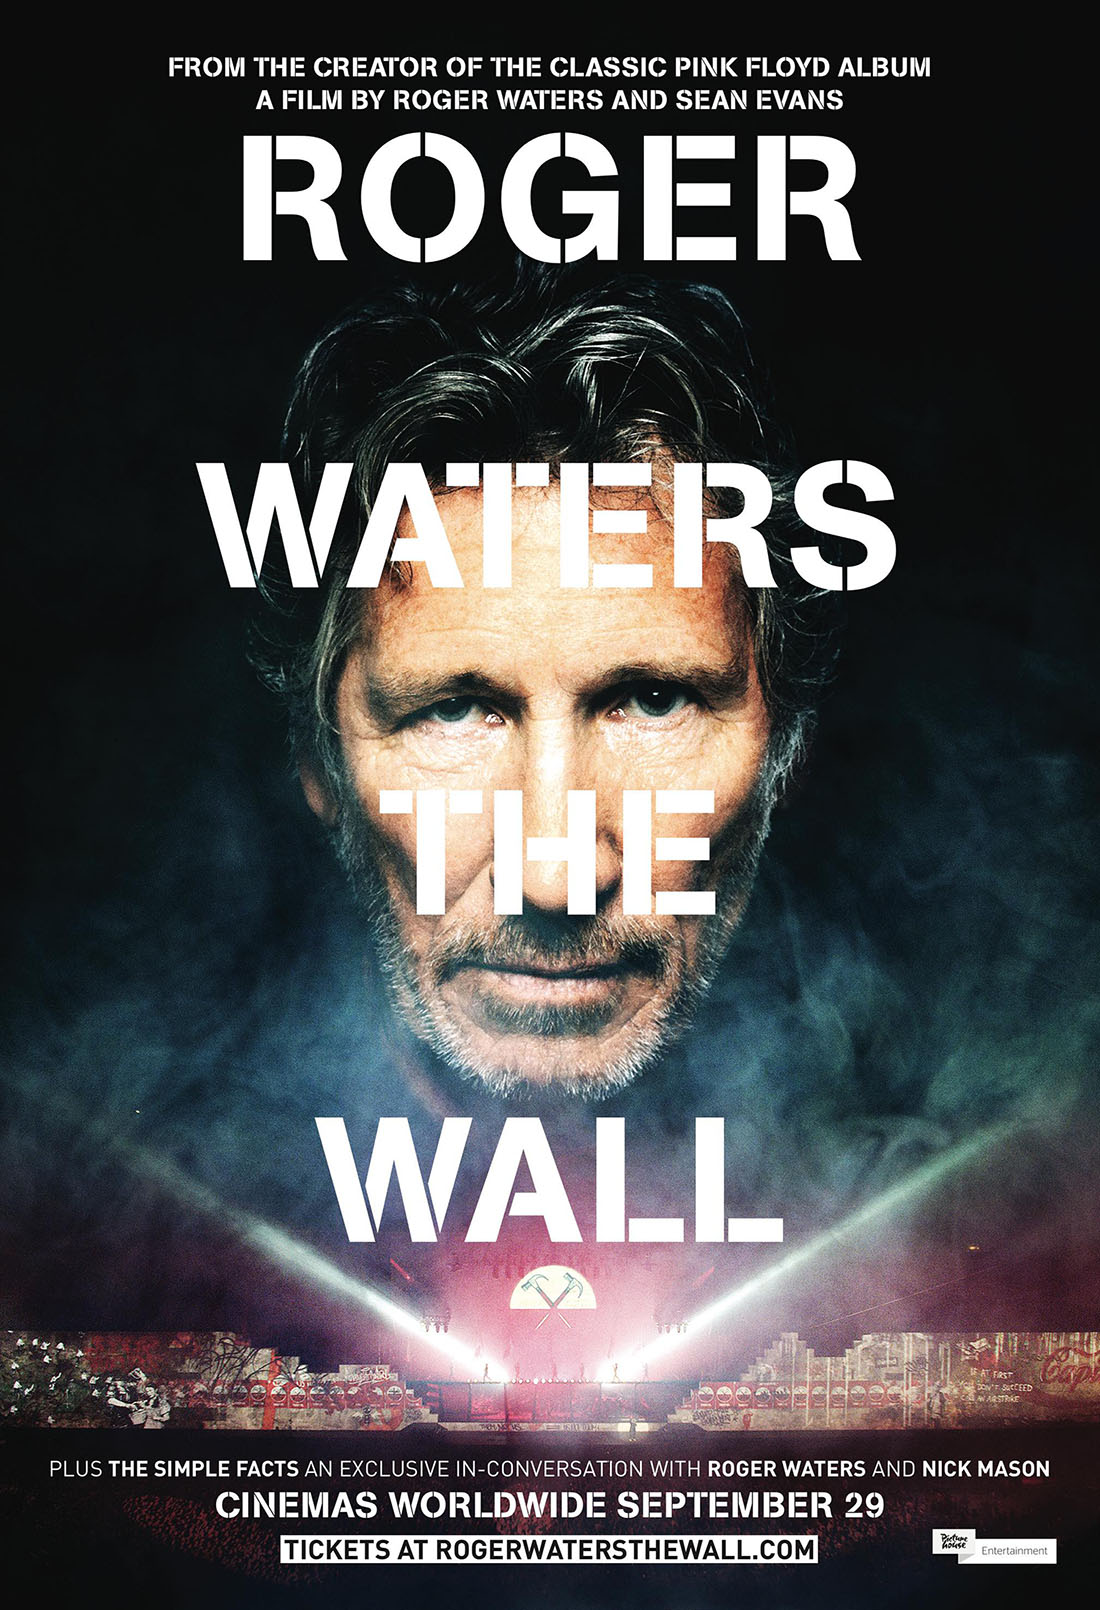 Roger Waters The Wall (special) Vue Cinemas